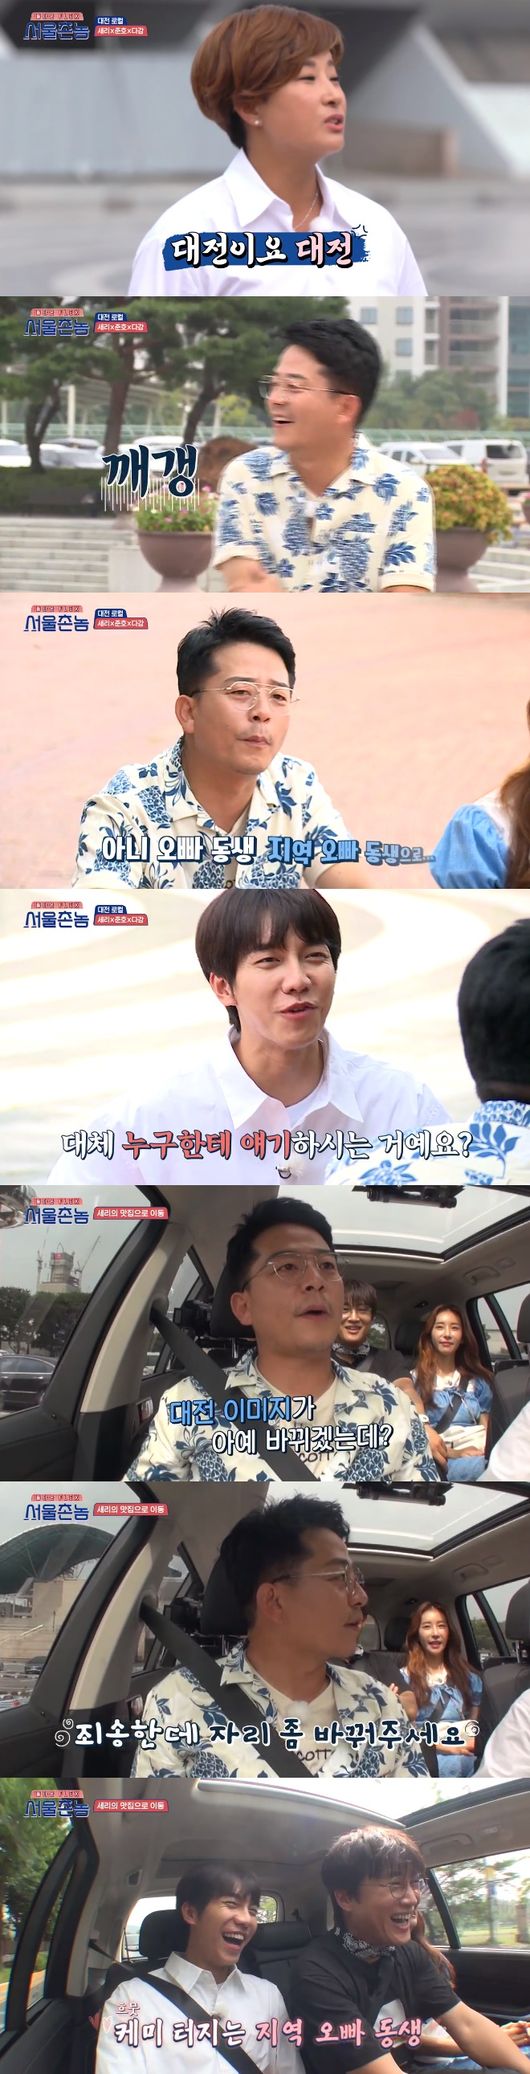 Lee Seung-gi said he hoped to get close to tit-for-tat Pak Se-ri and Kim Jun-ho.In the TVN entertainment Hometown Flex  broadcasted on the 23rd, Pak Se-ri and Kim Jun-ho showed a smile by showing Angsuk Chemie.On this day, Pak Se-ri said, It is difficult to get close to a Festival person. Kim Jun-ho replied, The director is a little bit like that, actually I am my brother.I asked Pak Se-ri, I am a person here, I live here, he said.After that, Pak Se-ri headed to Baek Sook & Duck Baek Sooks house, and Kim Jun-ho told Pak Se-ri, The image of the festival person will change.Then, next to the cool Pak Se-ri, he laughed, saying, Please change that seat.Lee Seung-gi, who watched the two people, said, I hope you two get close today.After arriving at Baeksuk house, five people performed Expression Commando game and Lee Seung-gi x Cha Tae-hyun, a Seoul team, won and ate duck meat and chicken pork.After eating the food, the production team said, This is so famous that there are many introverts. Then the introvert Thailand Doryeong appeared.Thailand explained Kim Jun-hos saju: My luck changed when I got into 46; luck goes forward, IC shit goes all the way, and it fits well with San EInstead, I just have to do things that are not out of words, words, legal, moral, and ethical, Kim Jun-ho said. I like water.I cant believe Im not a bad person.The introvert advised, Do the interior with the tree.Lee Seung-gi wondered about Pak Se-ri and Kim Jun-hos The Princess and the Matchmaker, saying, Do not you see The Princess and the Matchmaker?It fits very well, its good sums, Pak Se-ri is a big San E, so it fits well, the introvert said.Kim Jun-ho said, It would be nice to carry Kim Jun-ho. Kim Jun-ho was embarrassed that I am not a pet.Then I saw a private private private private company, Pak Se-ri: Its a mountain, a stone San E A mans a tree. Fortune to meet his natural life.Lee Seung-gi was surprised to say, Is it still a great luck?After that, I headed to the Expo Complex Shopping Center recommended by Handa. I can see the fashion when I come here, said Pak Se-ri. This place is cheap.Theres also an import corner, said Pak Se-ri, as the clothing store on the second floor arrived, heres my regular home, where my sister is really going well.The boss welcomed Pak Se-ri.After watching the clothes, I went up to the fourth floor and there was a fan signing.What if this is Yi Gi, buy it, Pak Se-ri said, revealing his self-interest, and Peedy replied, If youre Yi Gi, tell me what you want.The first citizen Choices Lee Seung-gi, so Pak Se-ri said, Do you think the Festival people Choices the Seoul people?The second little citizen also choices Lee Seung-gi and the childs mother said, Come here and Choices have changed.Lee Seung-gi showed her dance and met a citizen who was Choices and said, I can not express it. ... It is too active.Its not no jam, and Kim Jun-ho said, Its changed a lot. Game was the final winner of Lee Seung-gi, Lee Seung-gi was shopping with Pak Se-ri, saying he needed a tissue case, and he got pumpkin sikhye.broadcast screen capture